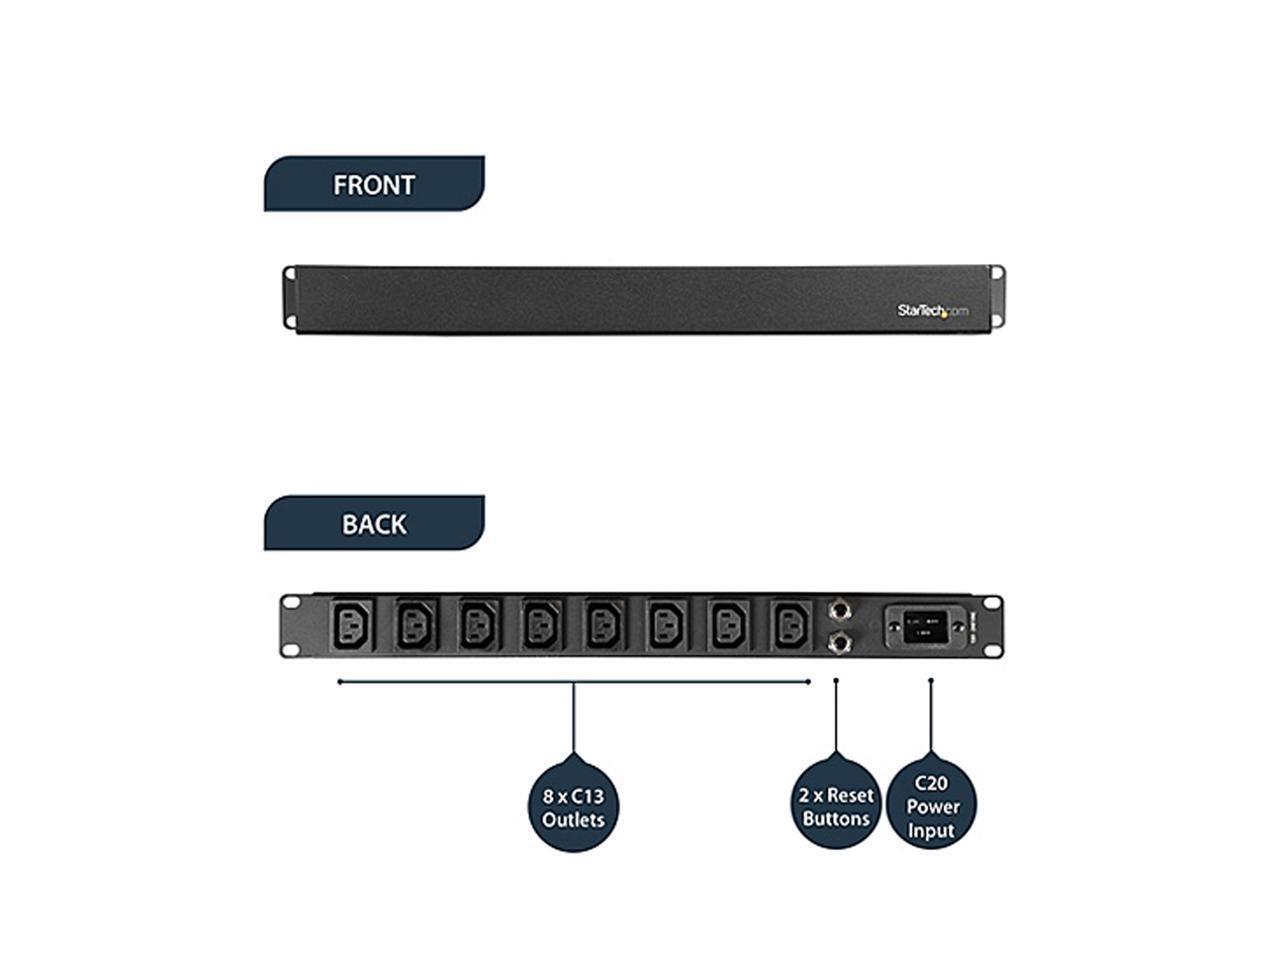 StarTech PDU08C13H 8-Port Rack-Mount PDU with C13 Outlets - 10 ft. Power Cord